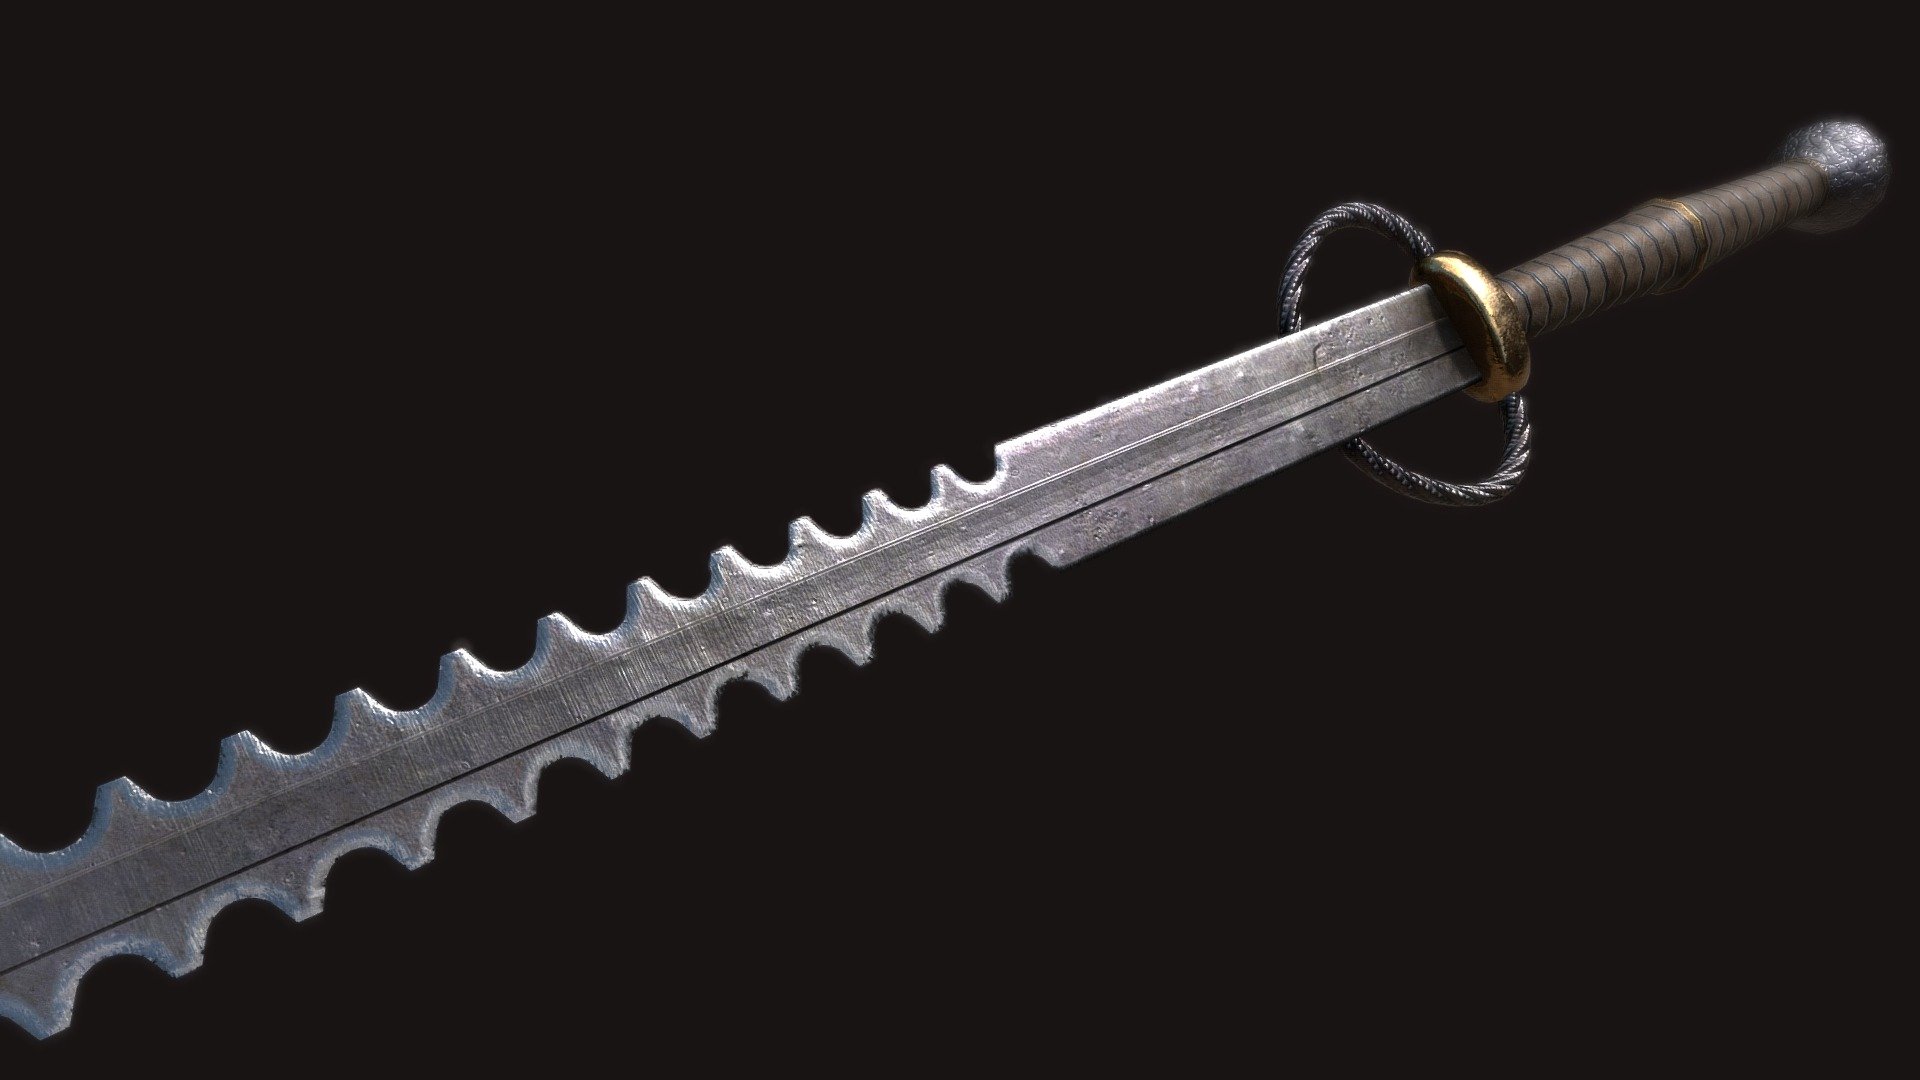 This is once again a two handed sword with a saw blade cut, this time with smaller teeth 3d model